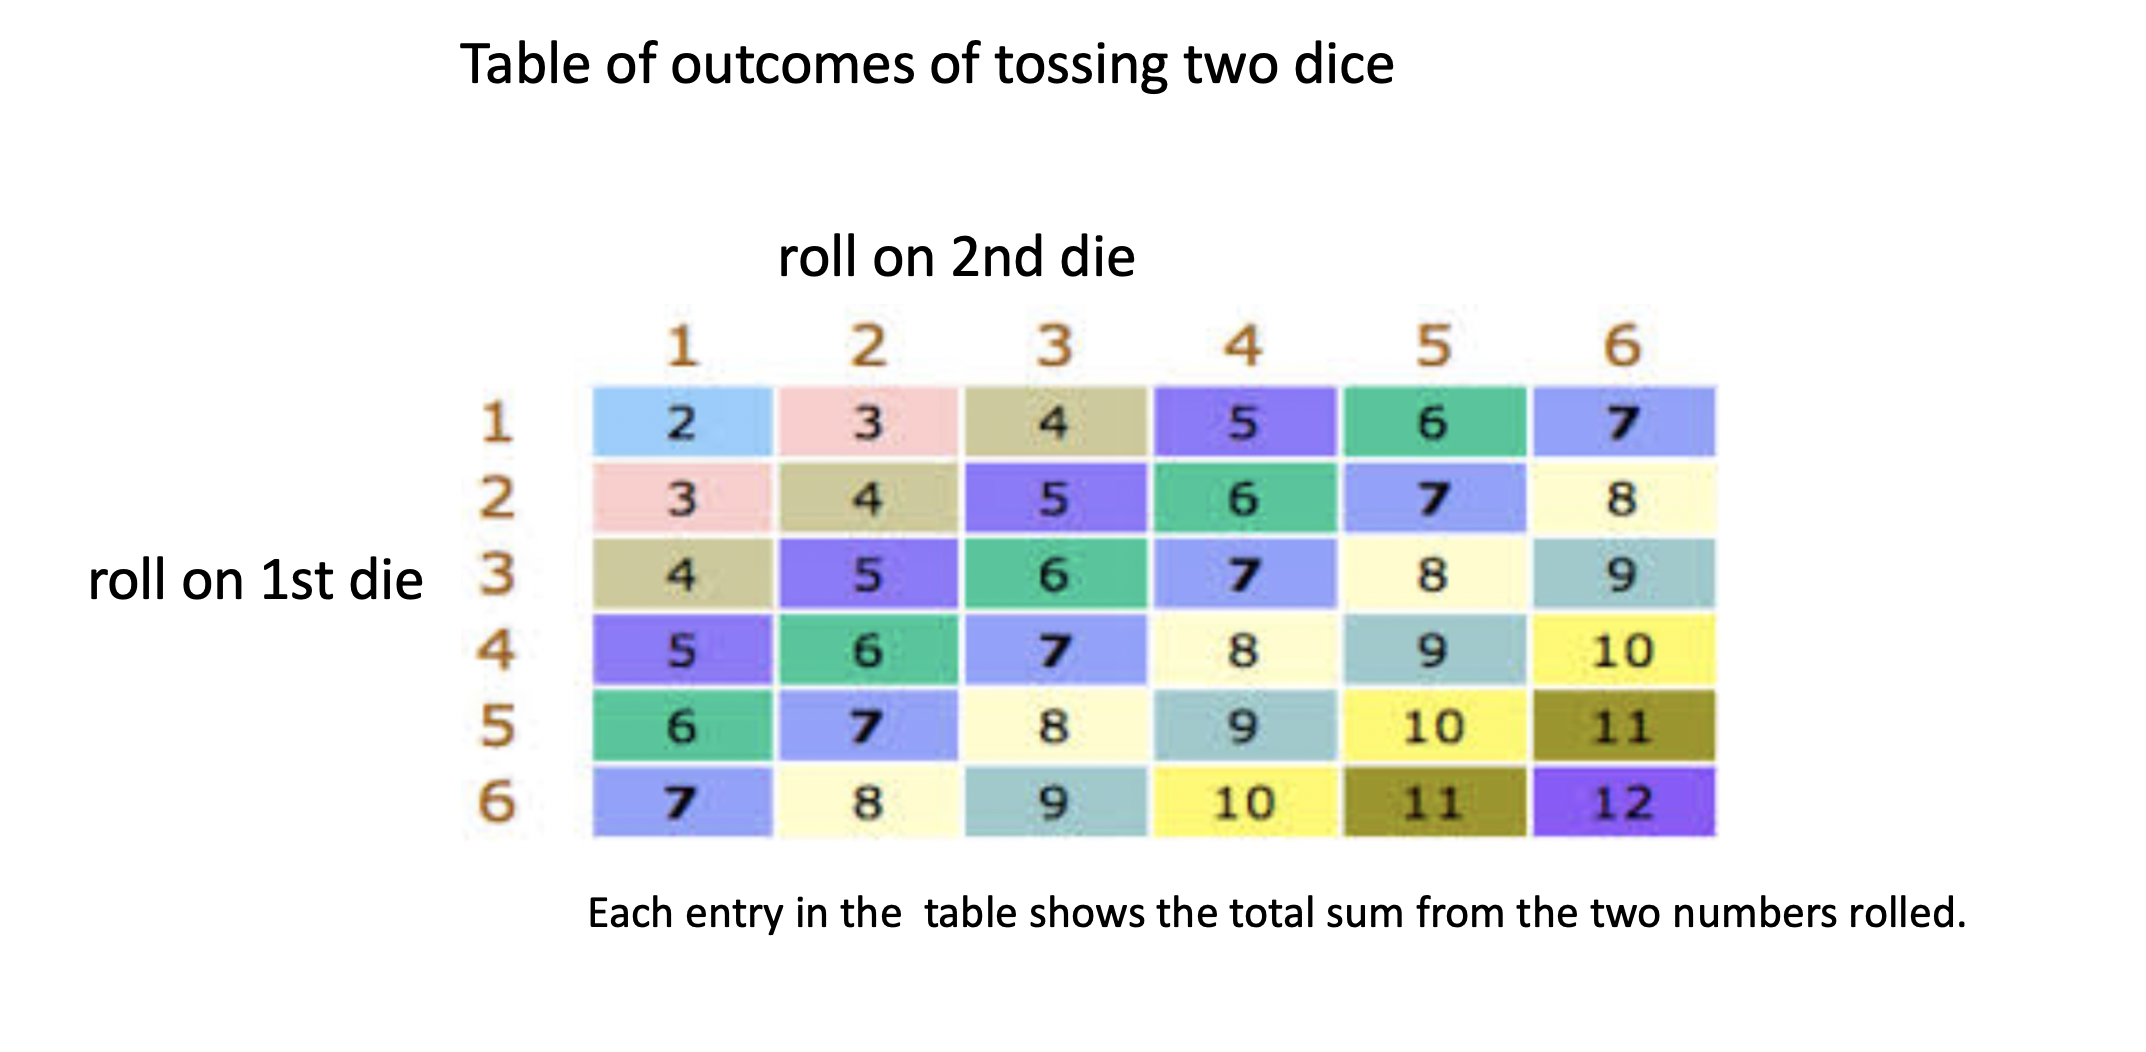 Table of outcomes of tossing two dice